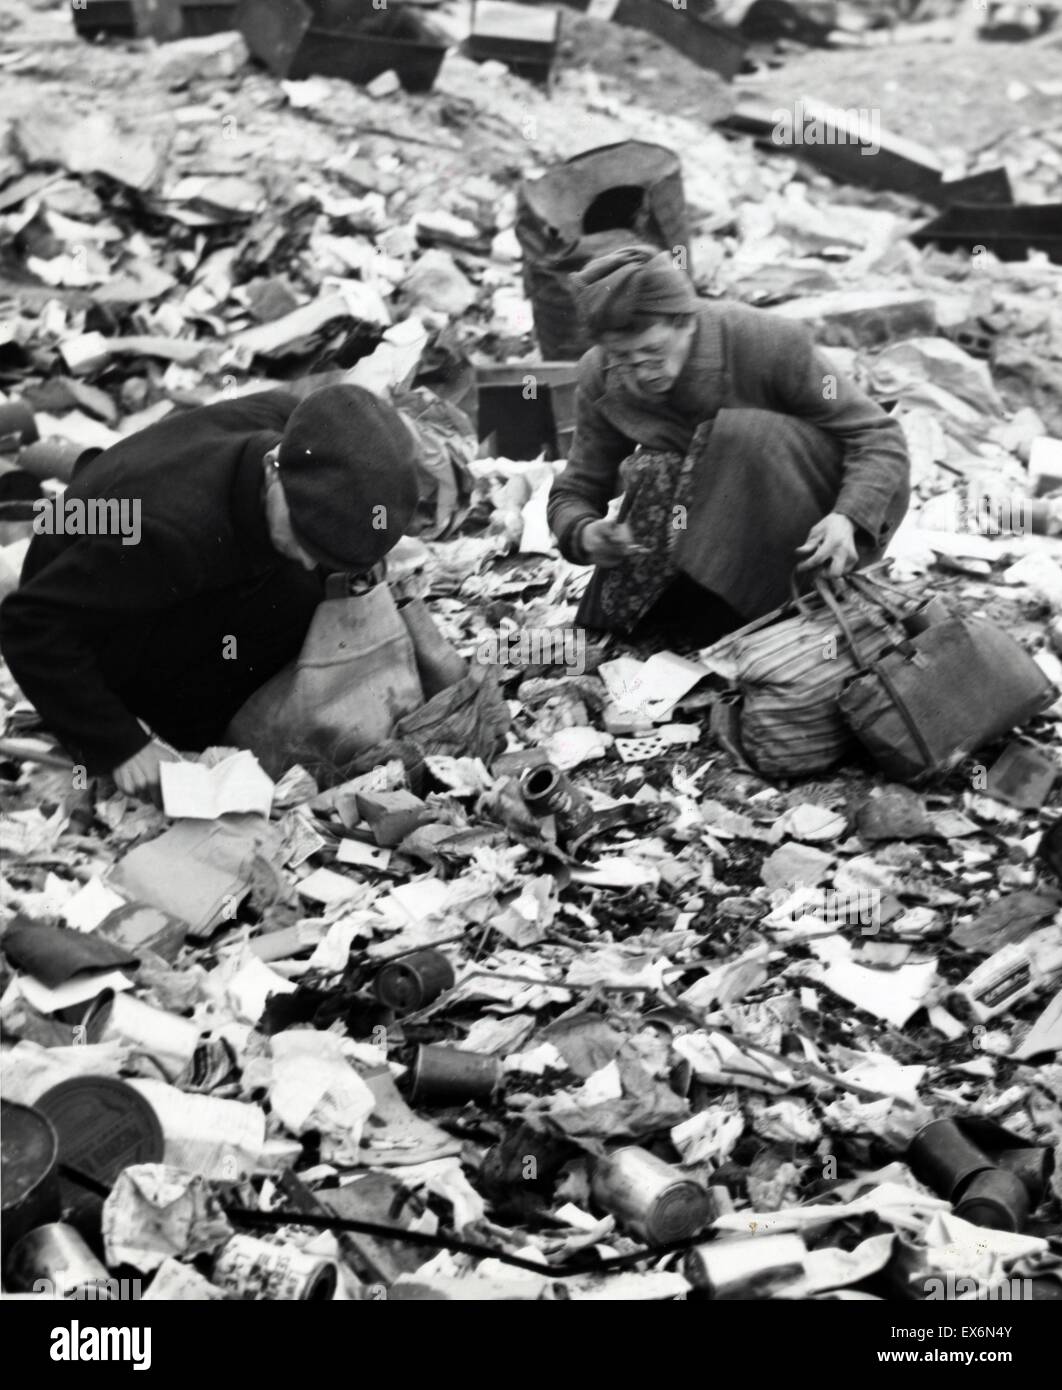 Photograph depicting a starving Berliners searching for food in a garbage dump during World War Two. Photographed by Emil Reynolds. Dated 1945 Stock Photo